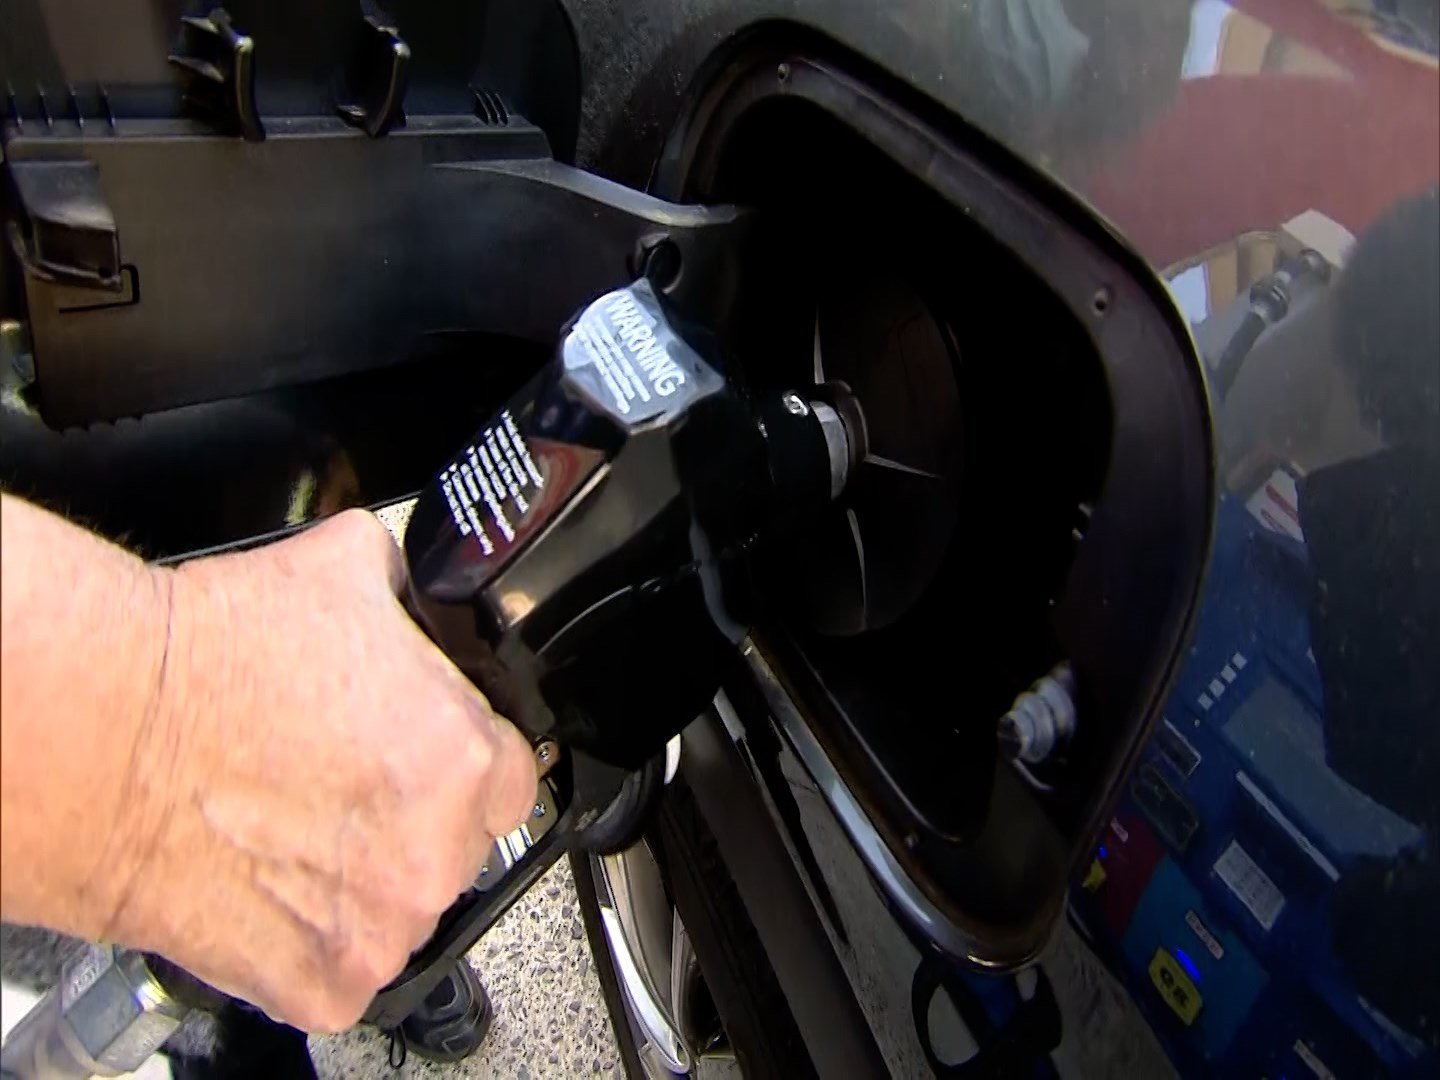 Western Pa. Gas Prices 3 Cents Higher this Week